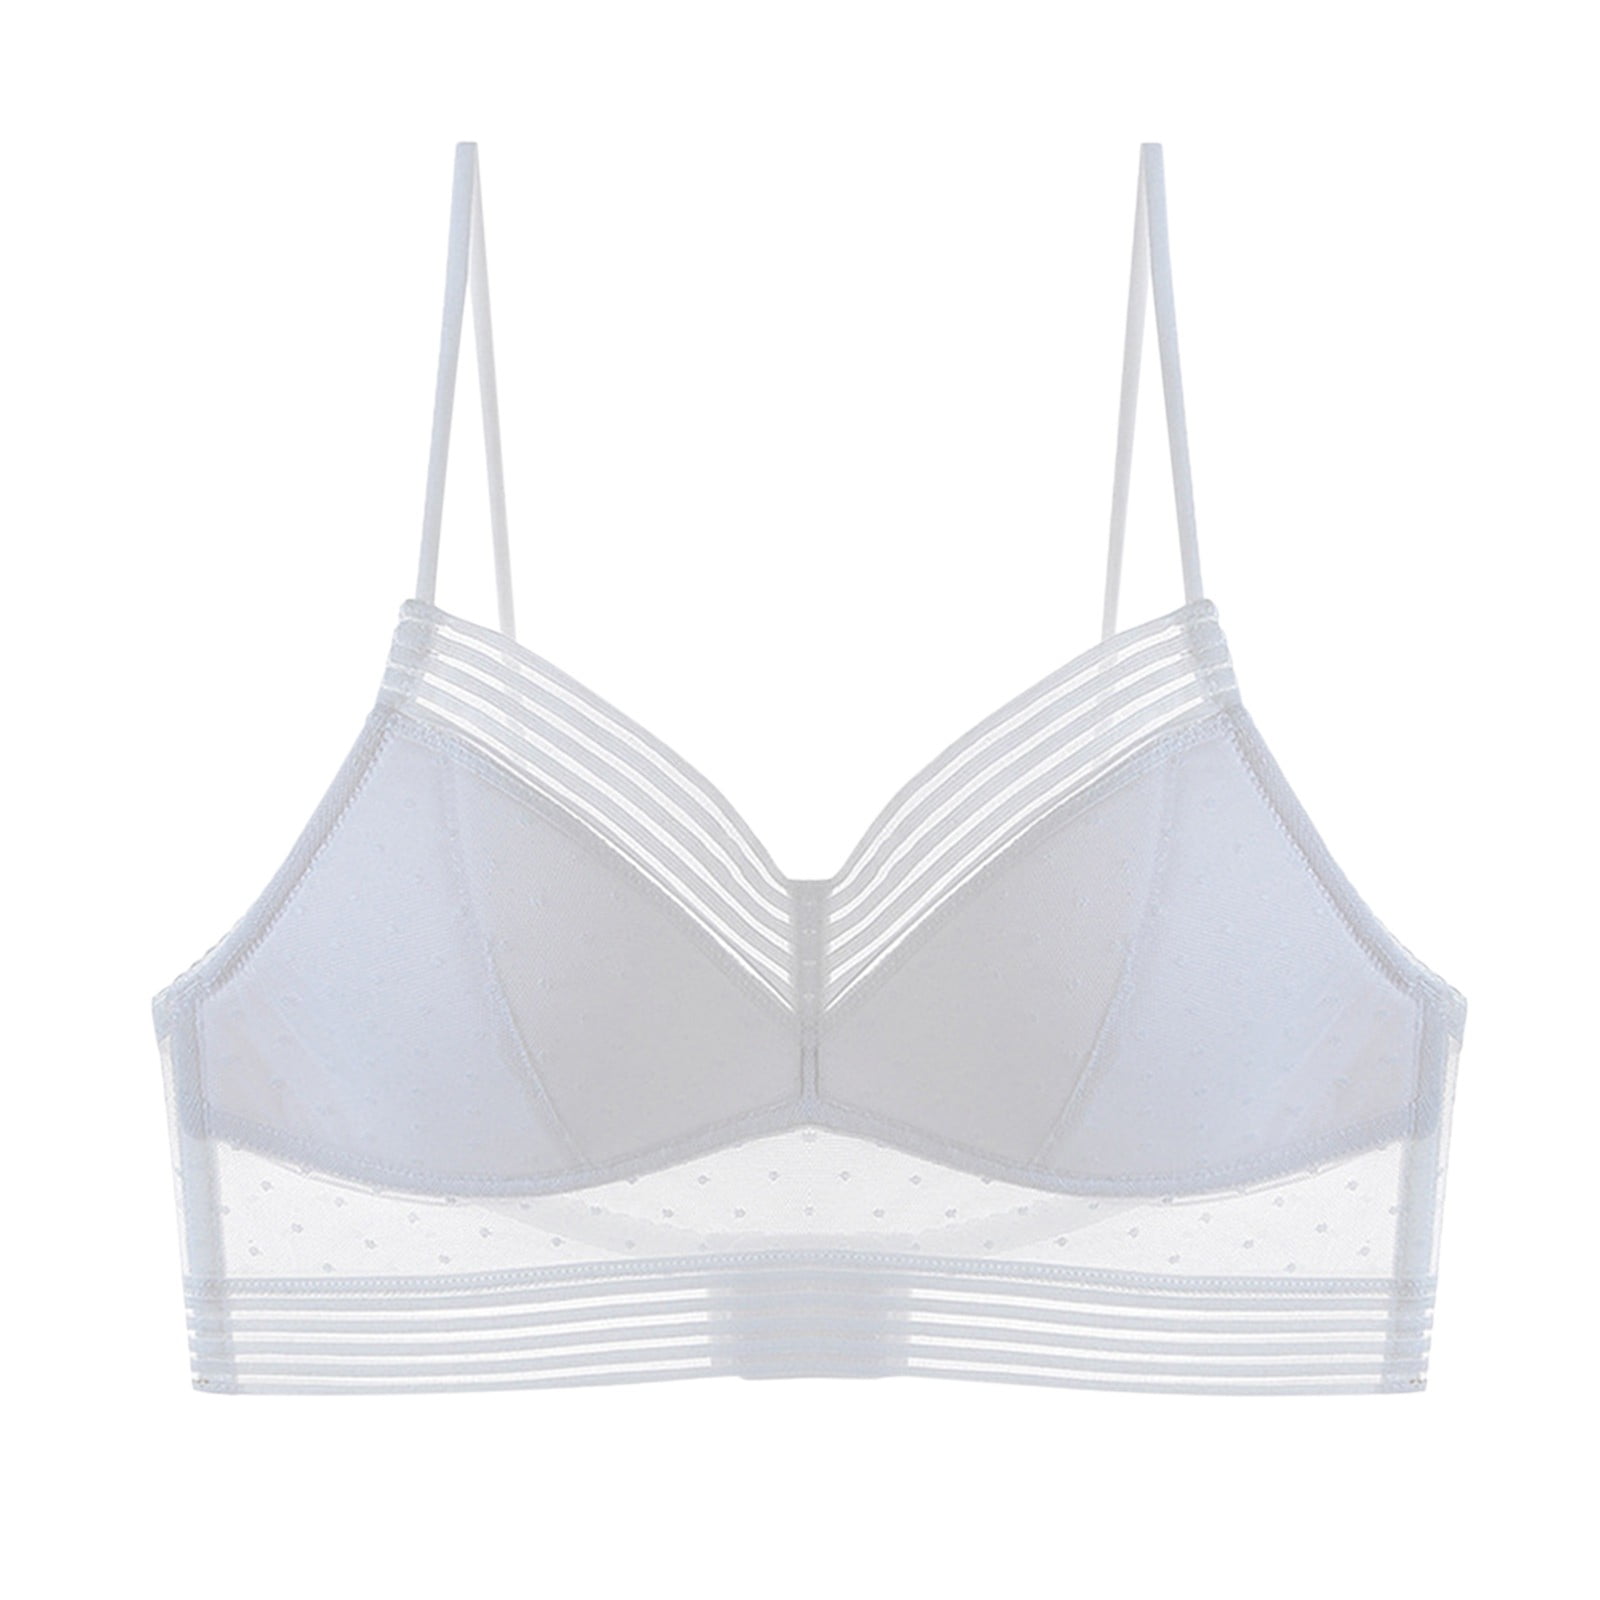 CLZOUD Comfort Shaping Bras for Women Comfortable Lace French